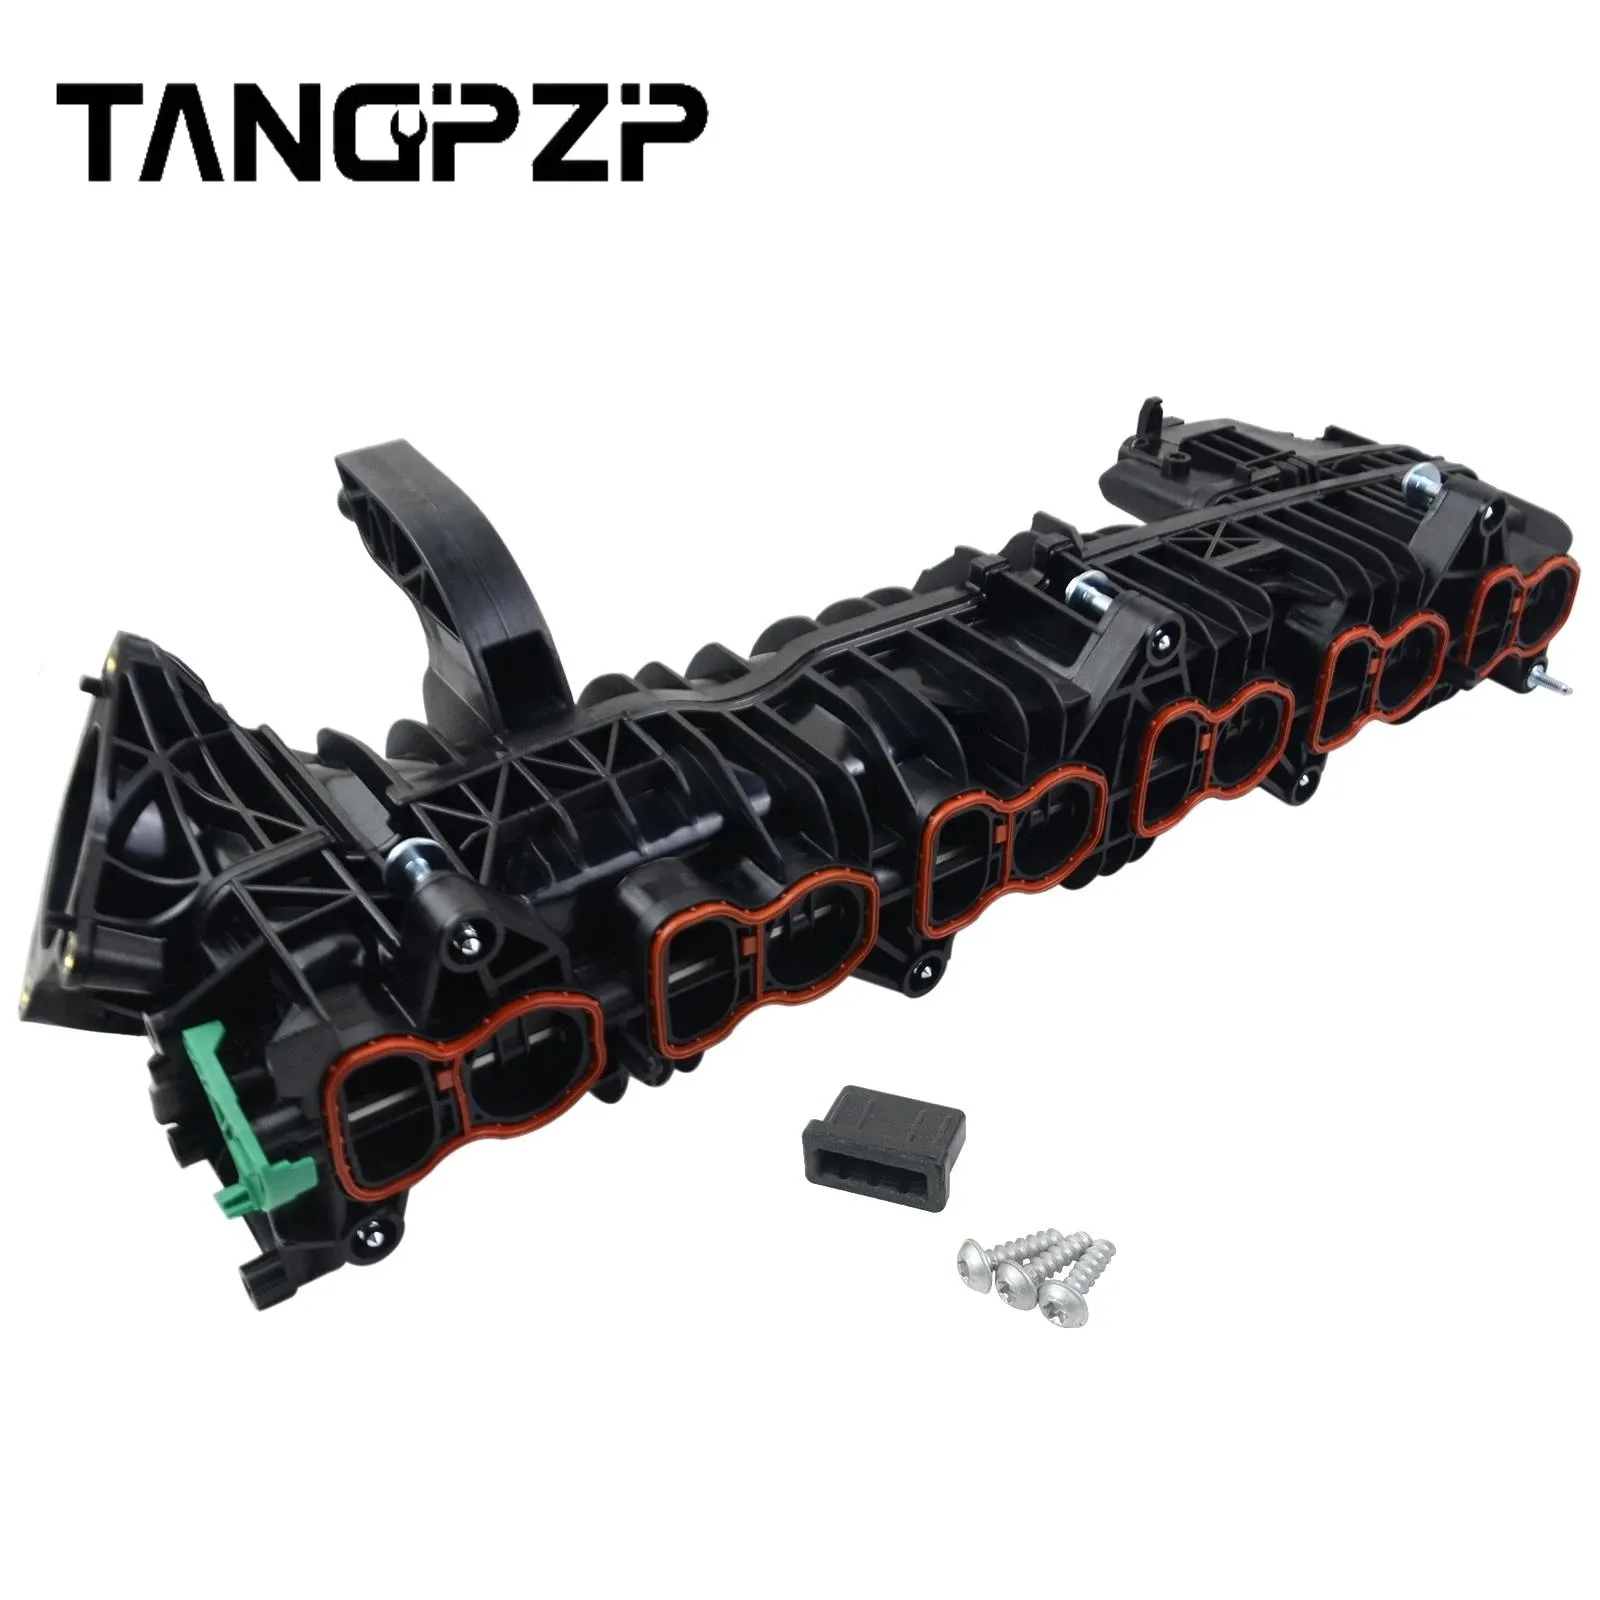 

11617811909 New Intake Manifold Without Actuator For BMW F30 F31 F33 F32 F10 F11 F12 F13 F15 F01 F02 X3 X4 X5 X6 N57